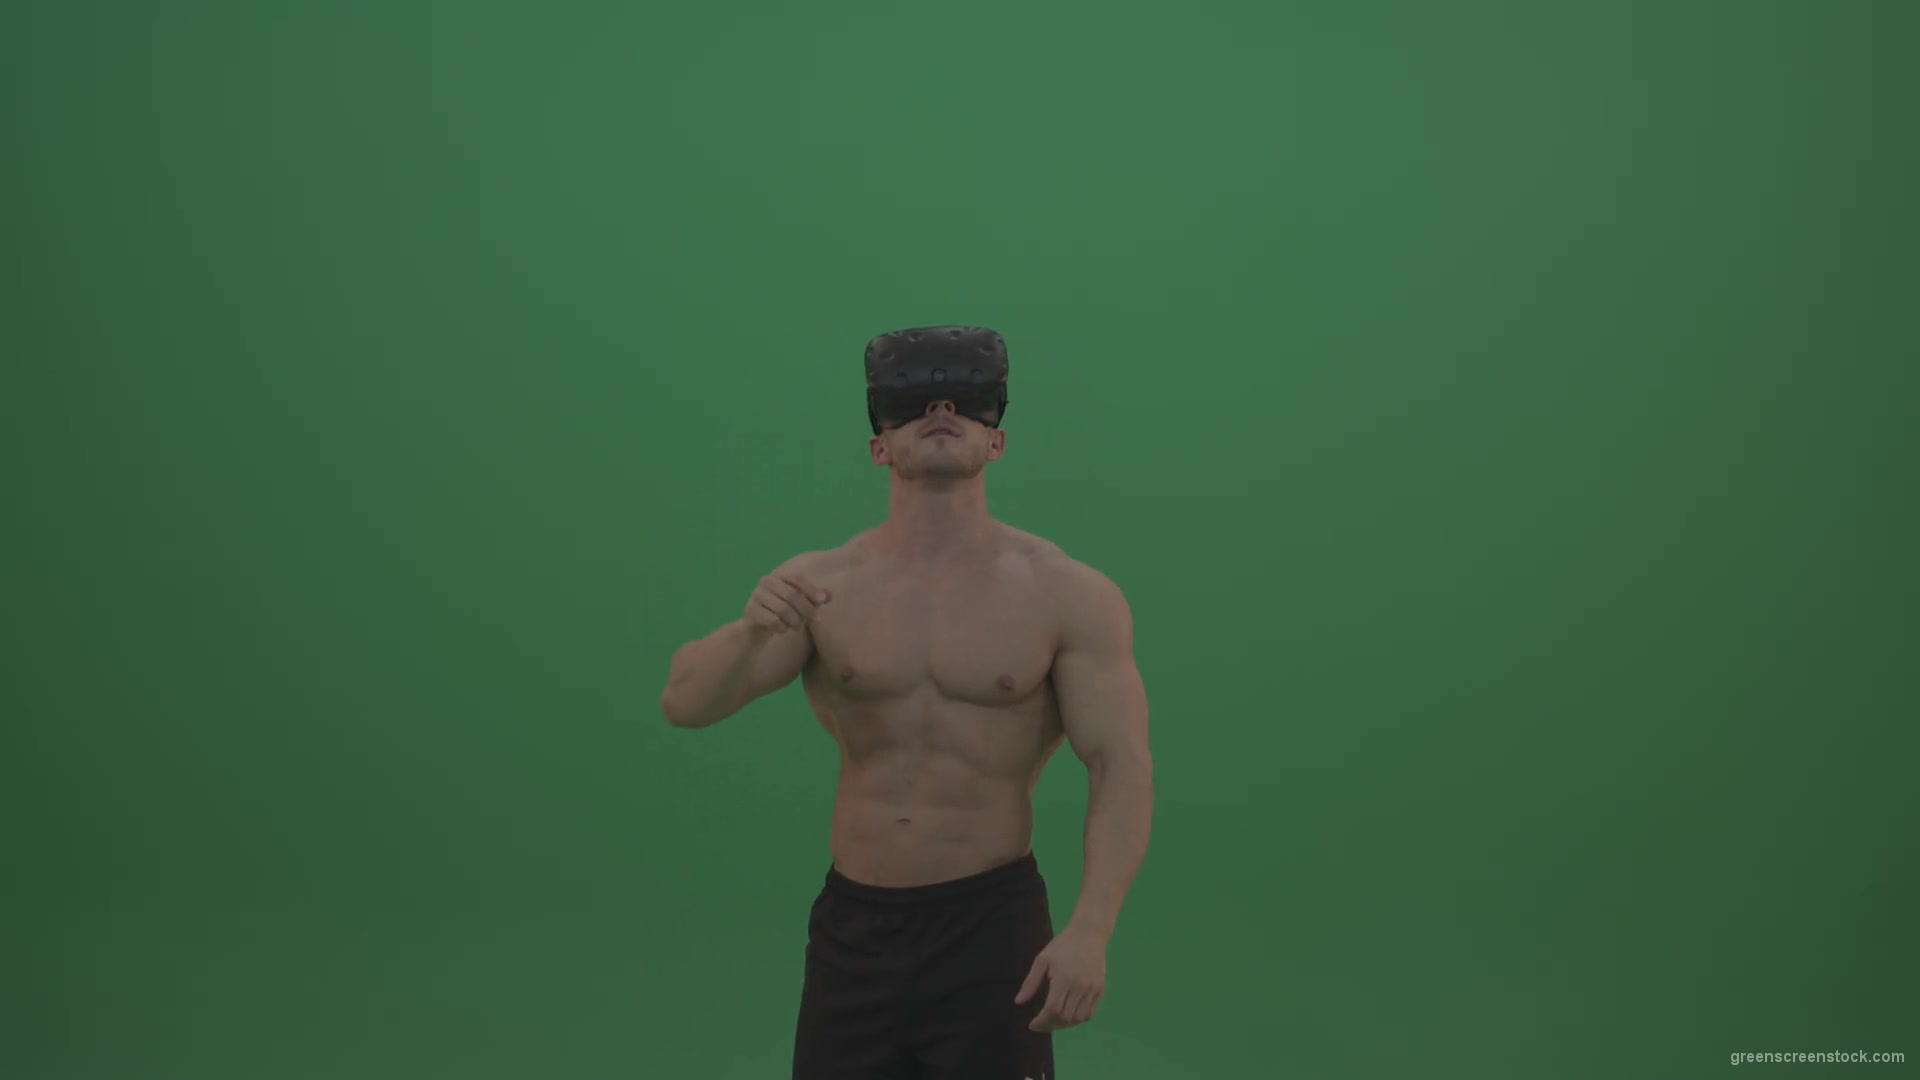 Young_Athletic_Bodybuilder_Working_On_Touch_Pad_Using_Virtual_Reality_Kit_On_Green_Screen_Wall_Background-1920_005 Green Screen Stock